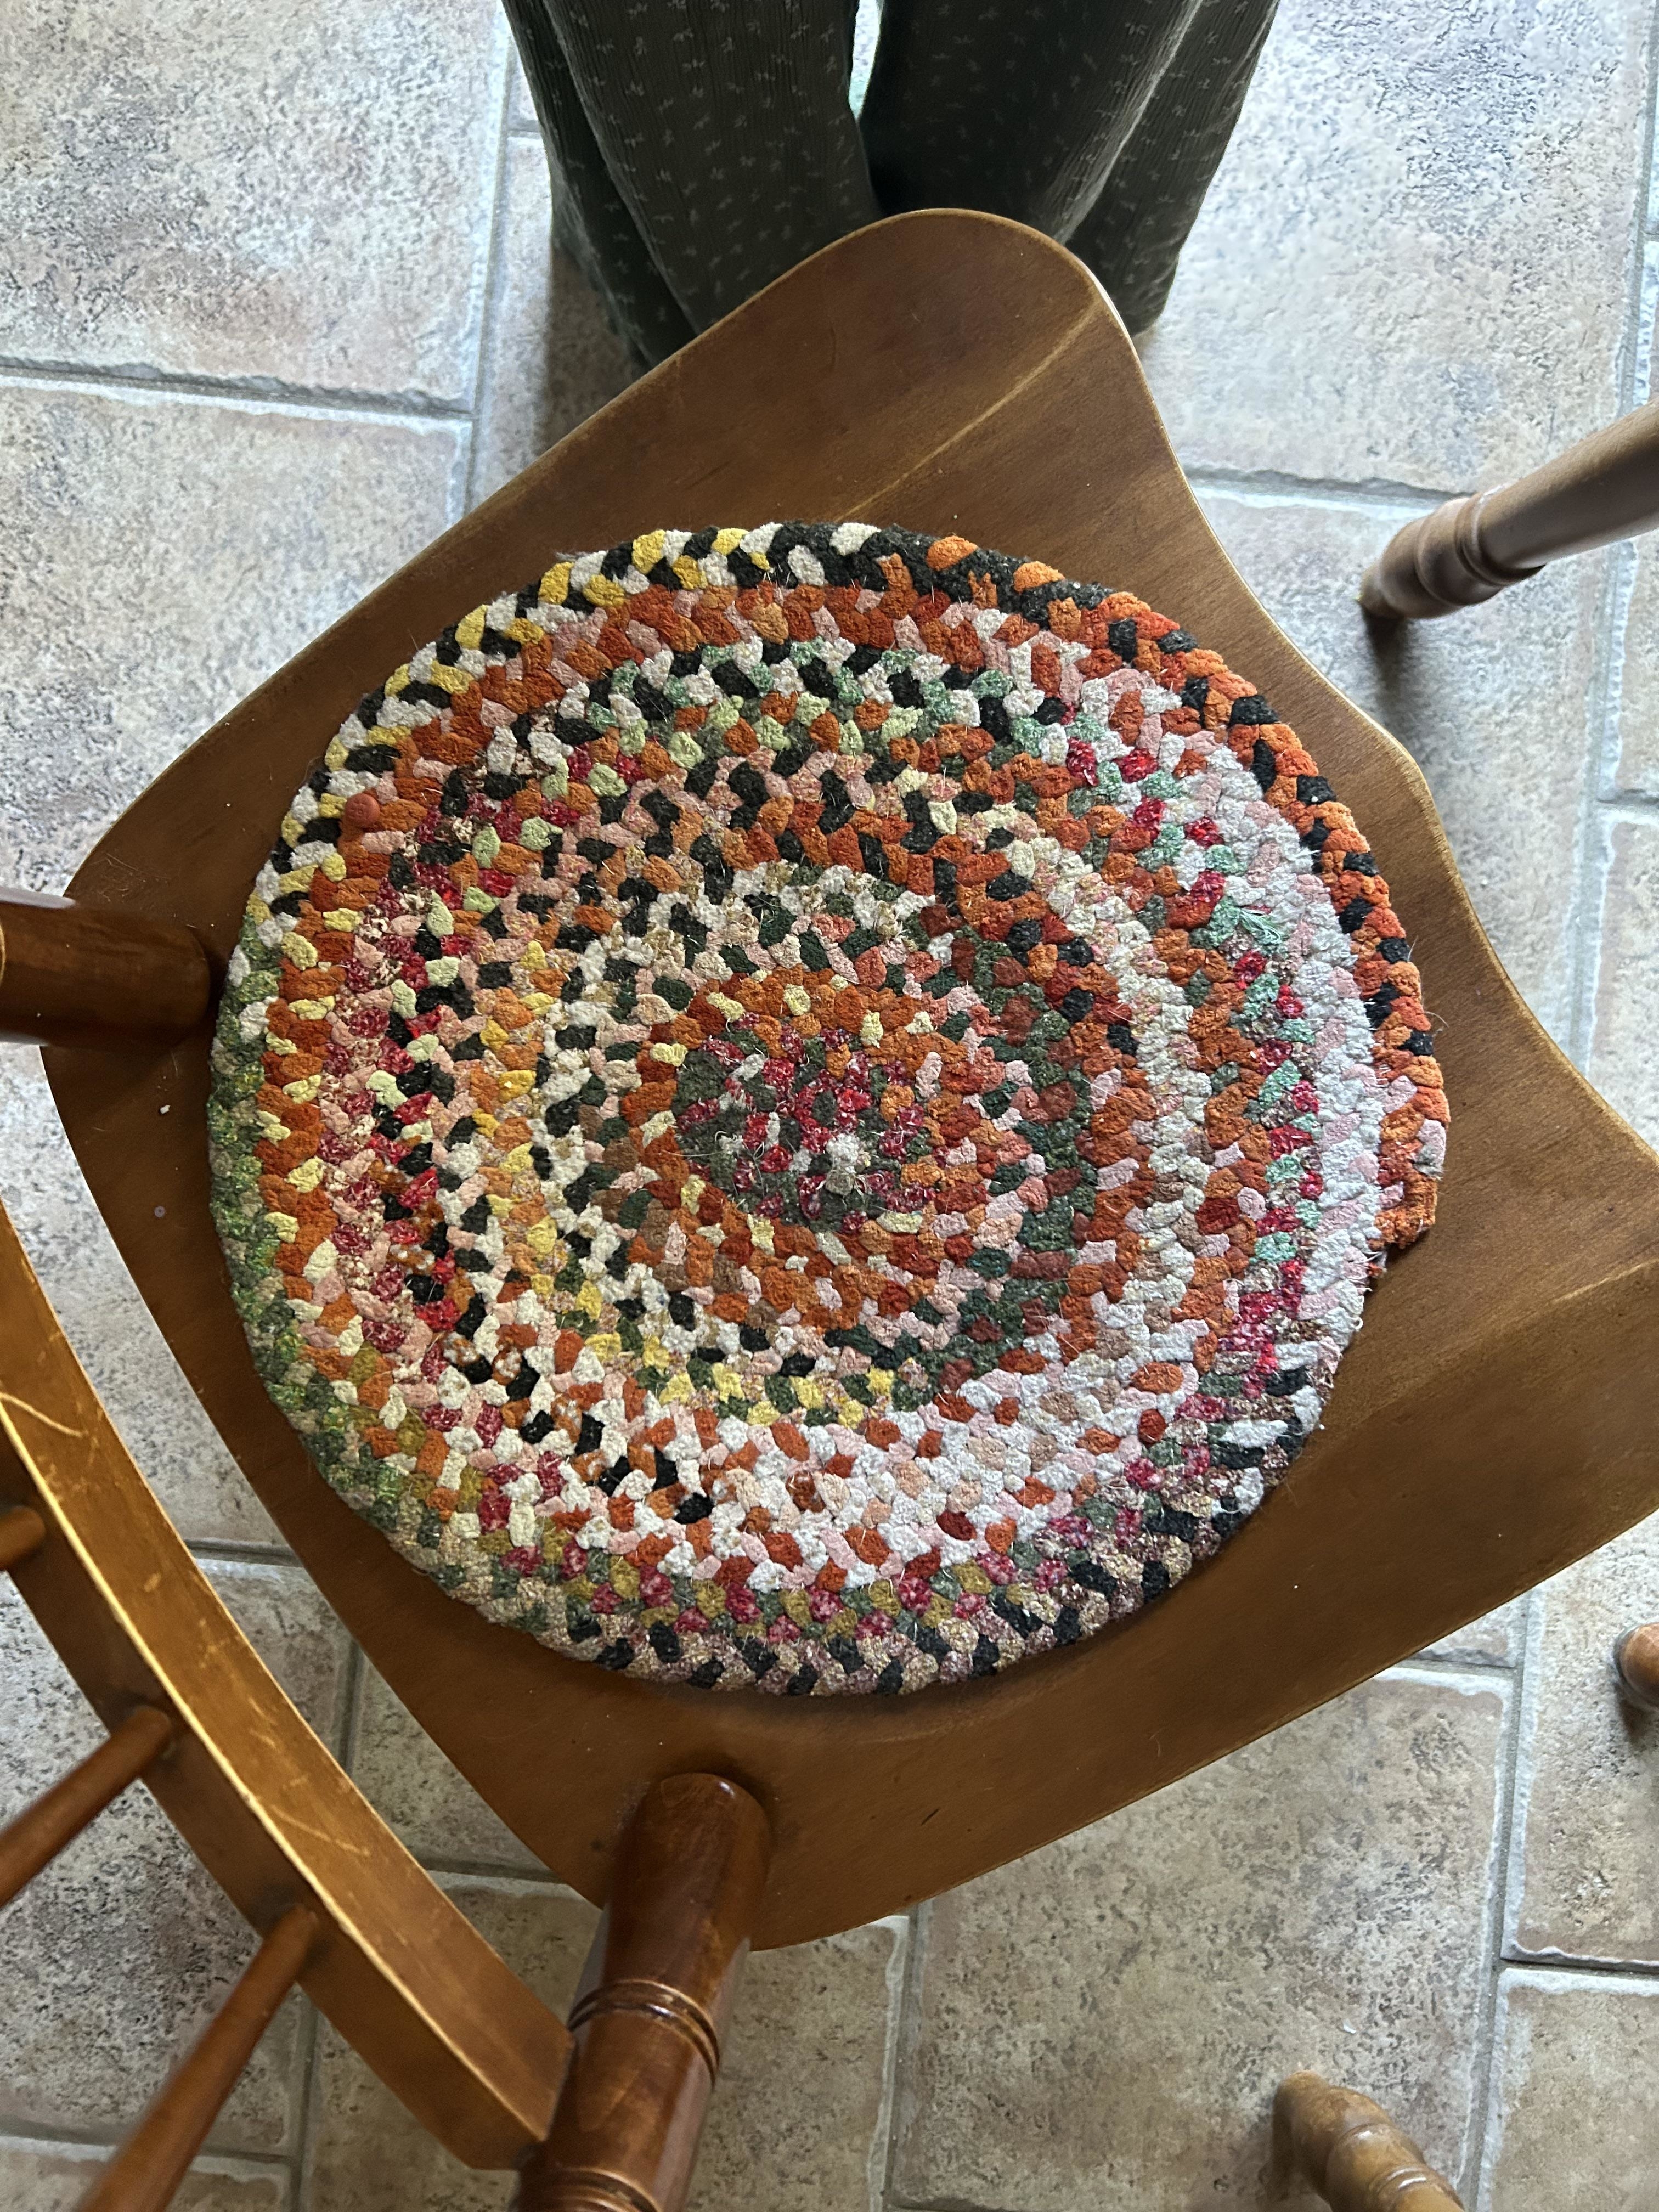 Crocheted multicolor round cushion on a wooden chair, viewed from above. A person&#x27;s legs are partially visible in the background, standing on a tiled floor